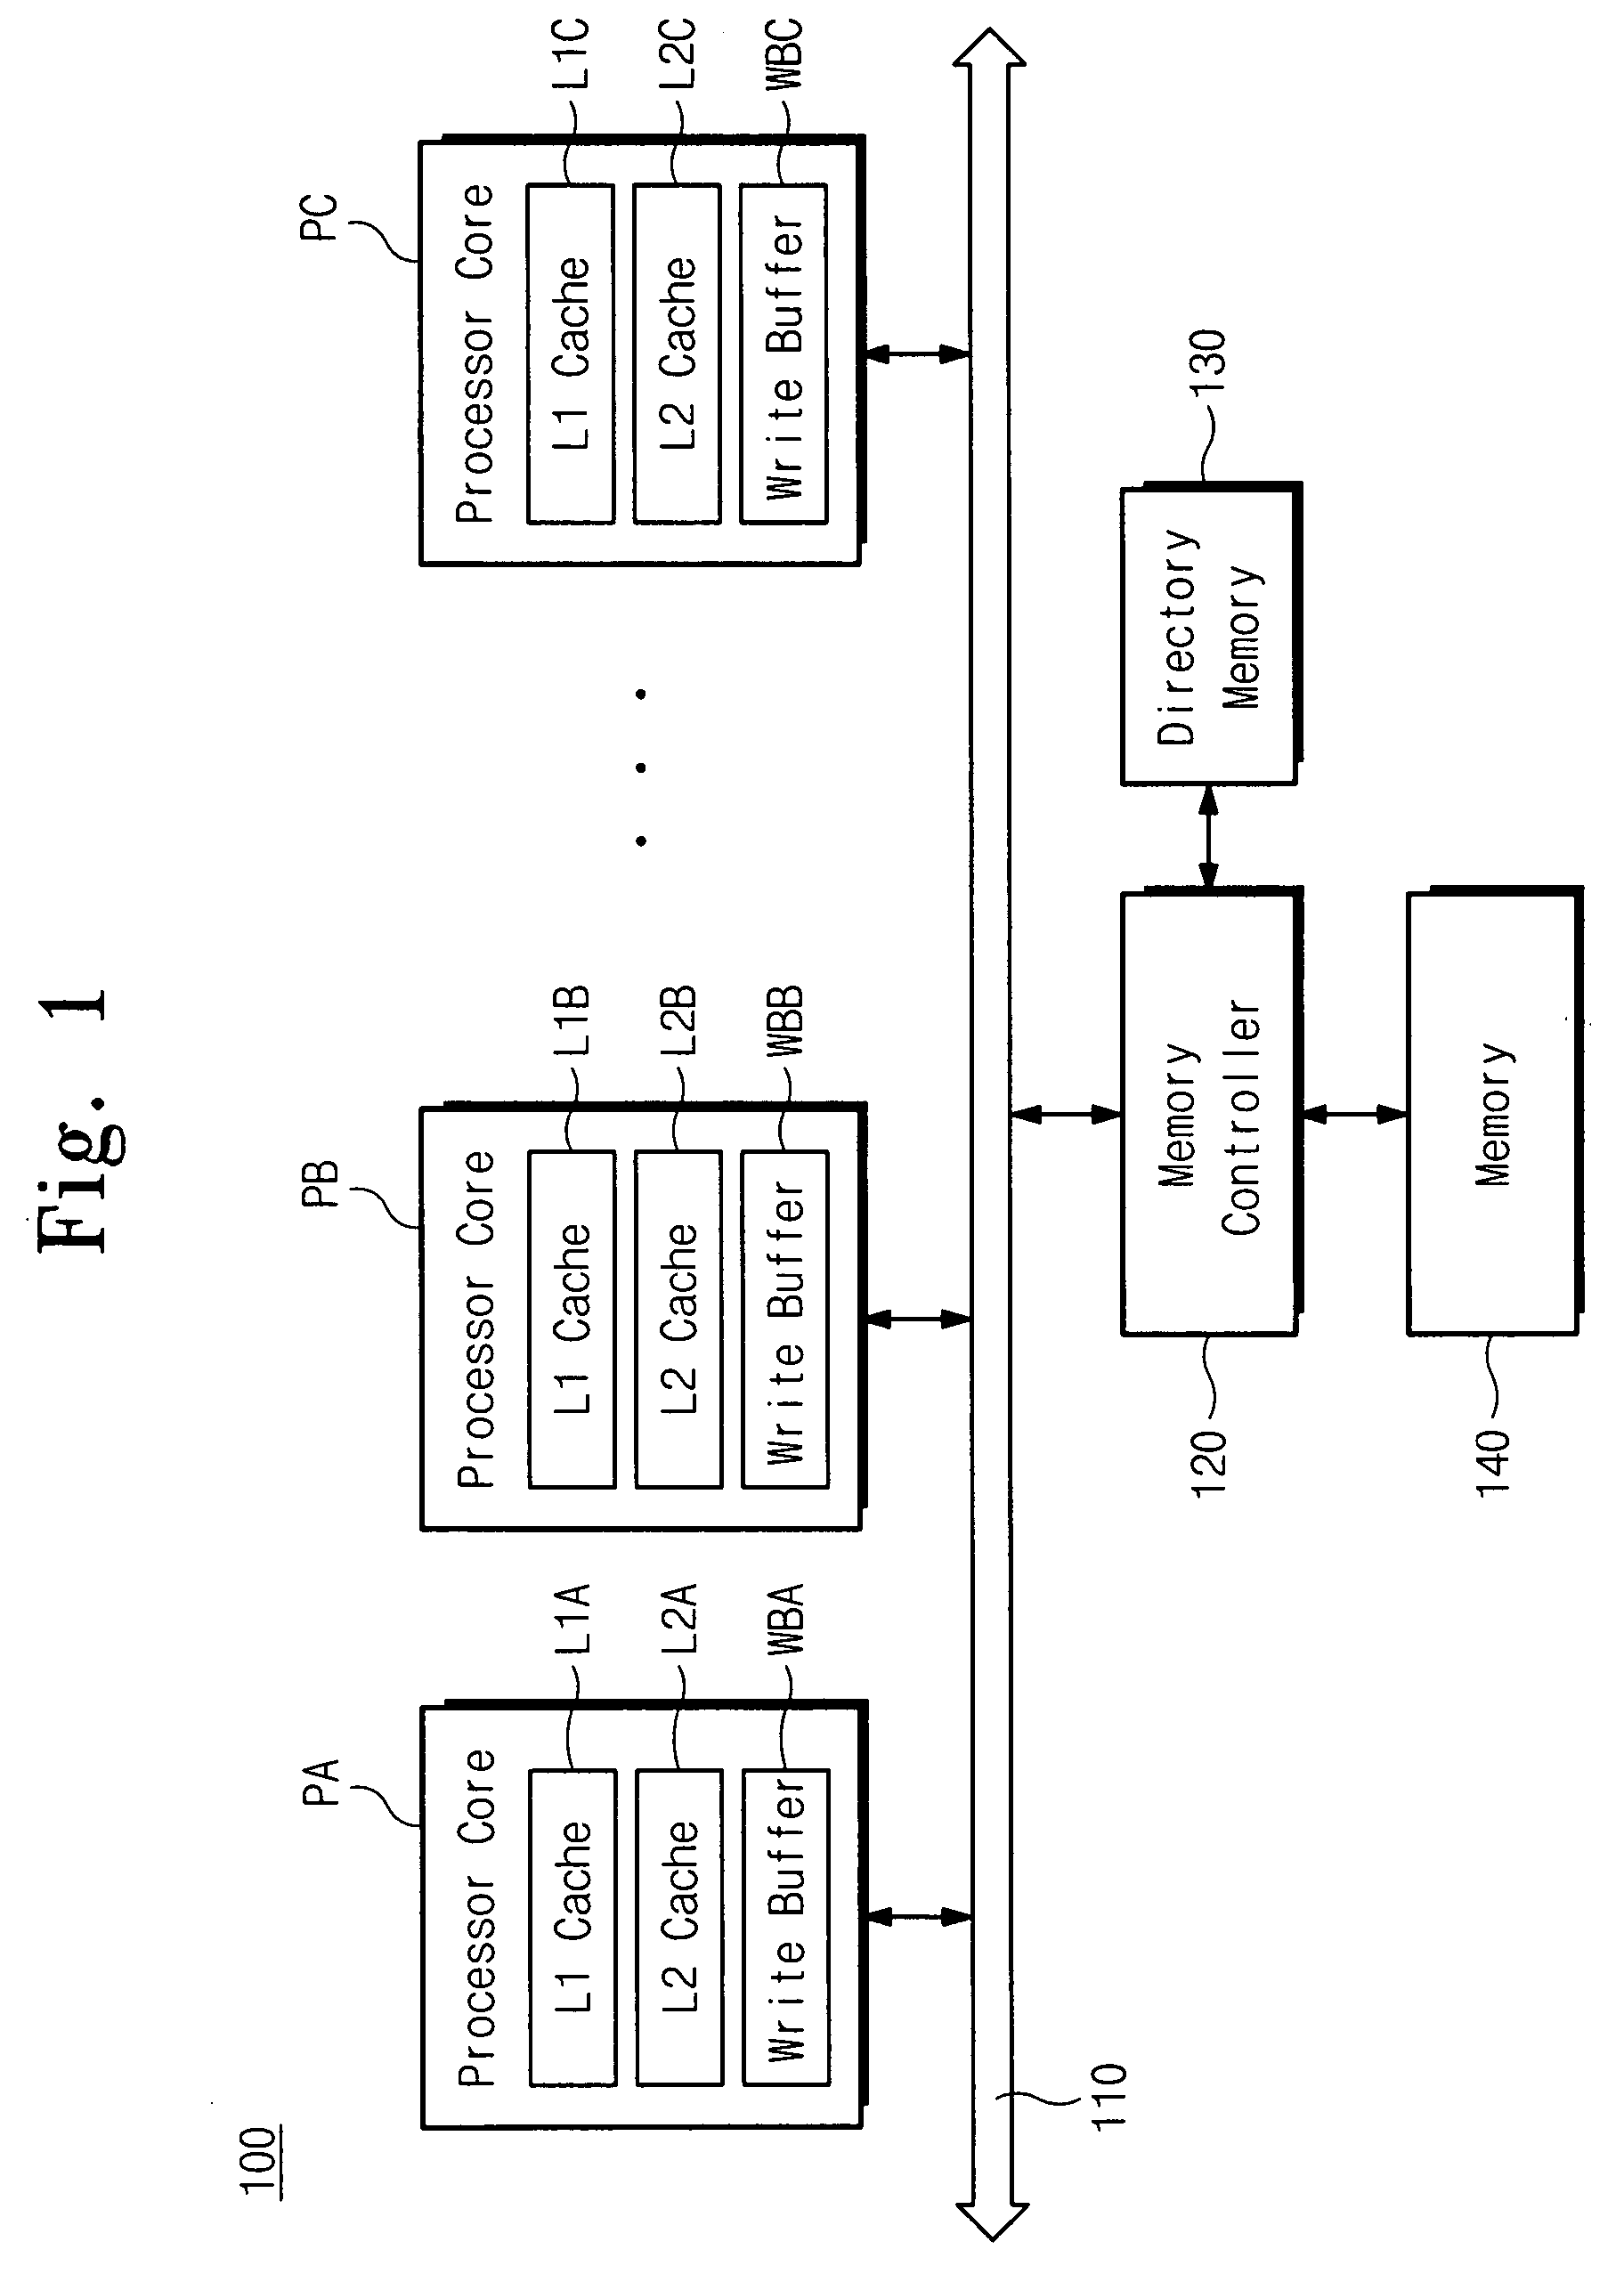 Multiprocessor system and method to maintain cache coherence